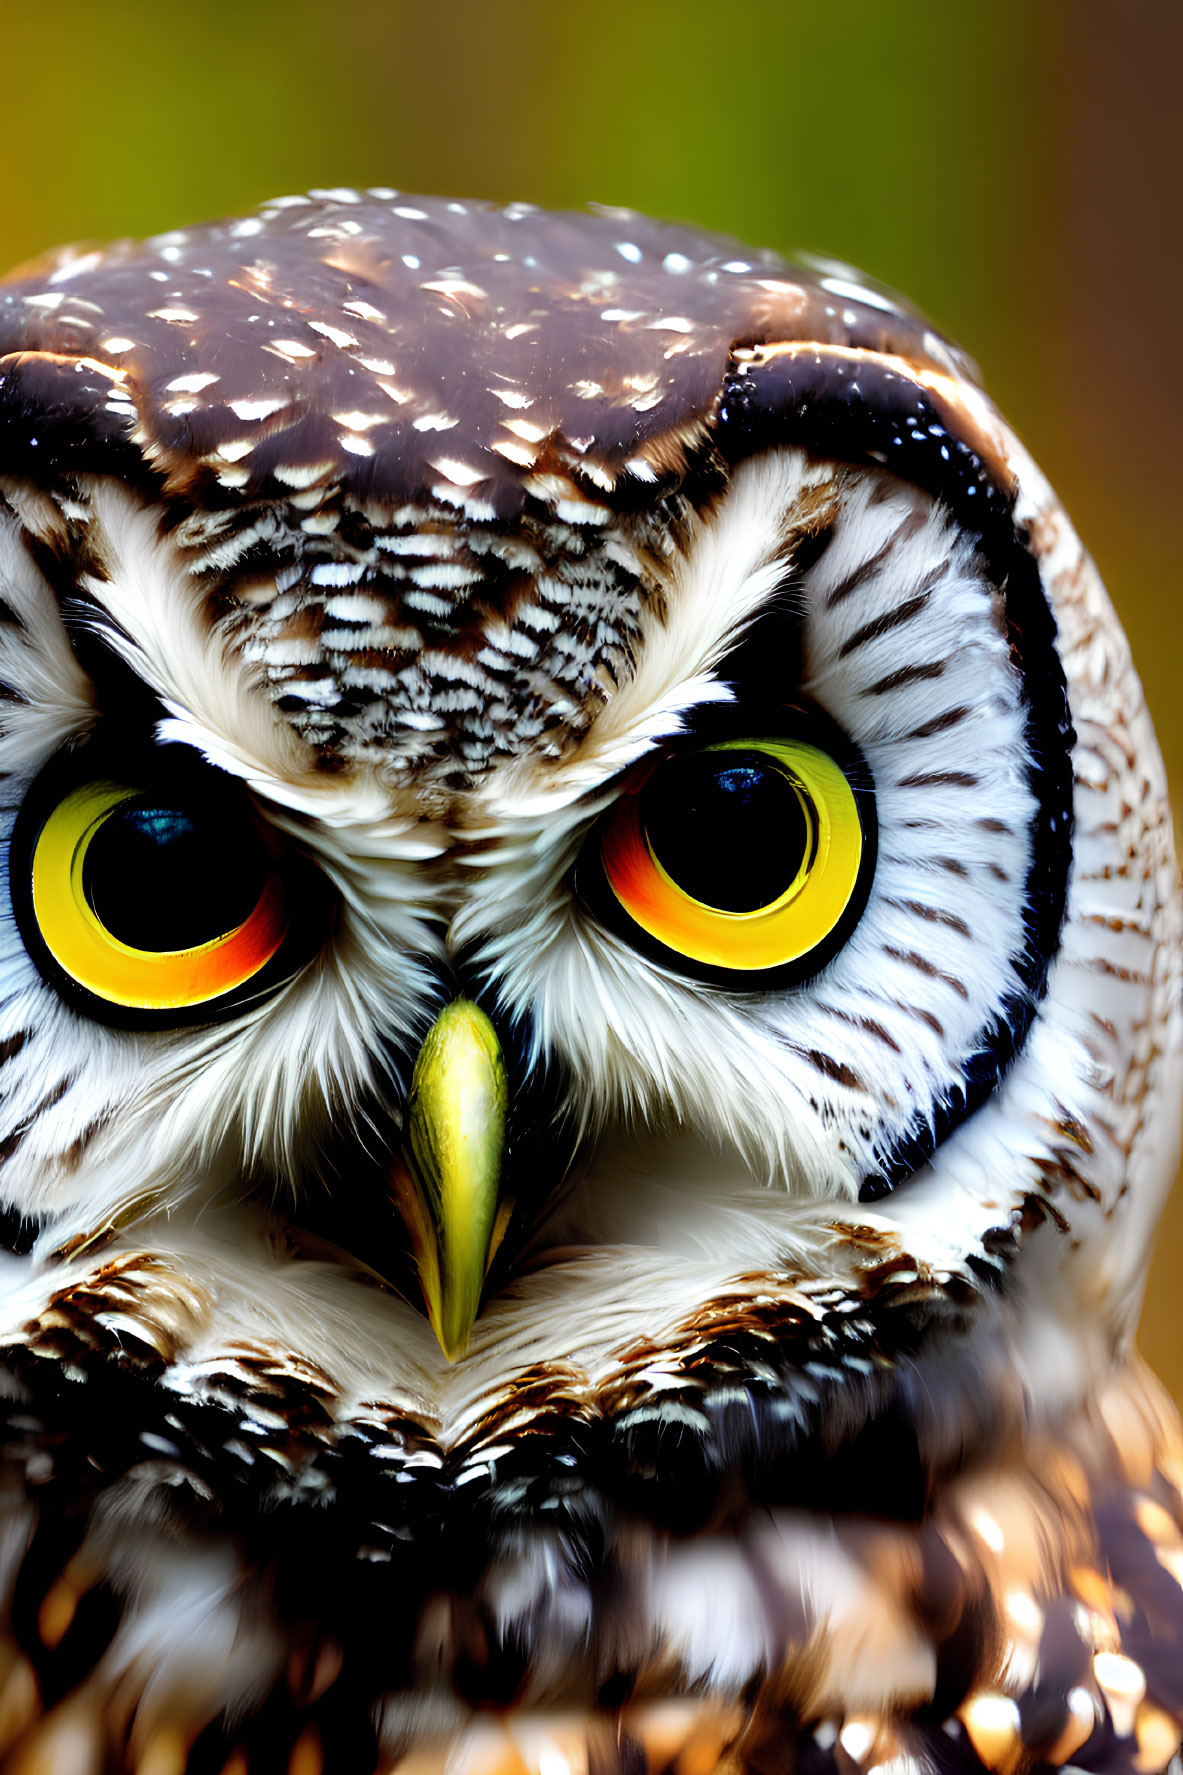 Detailed Close-Up of Owl with Intense Yellow Eyes and Mottled Plumage